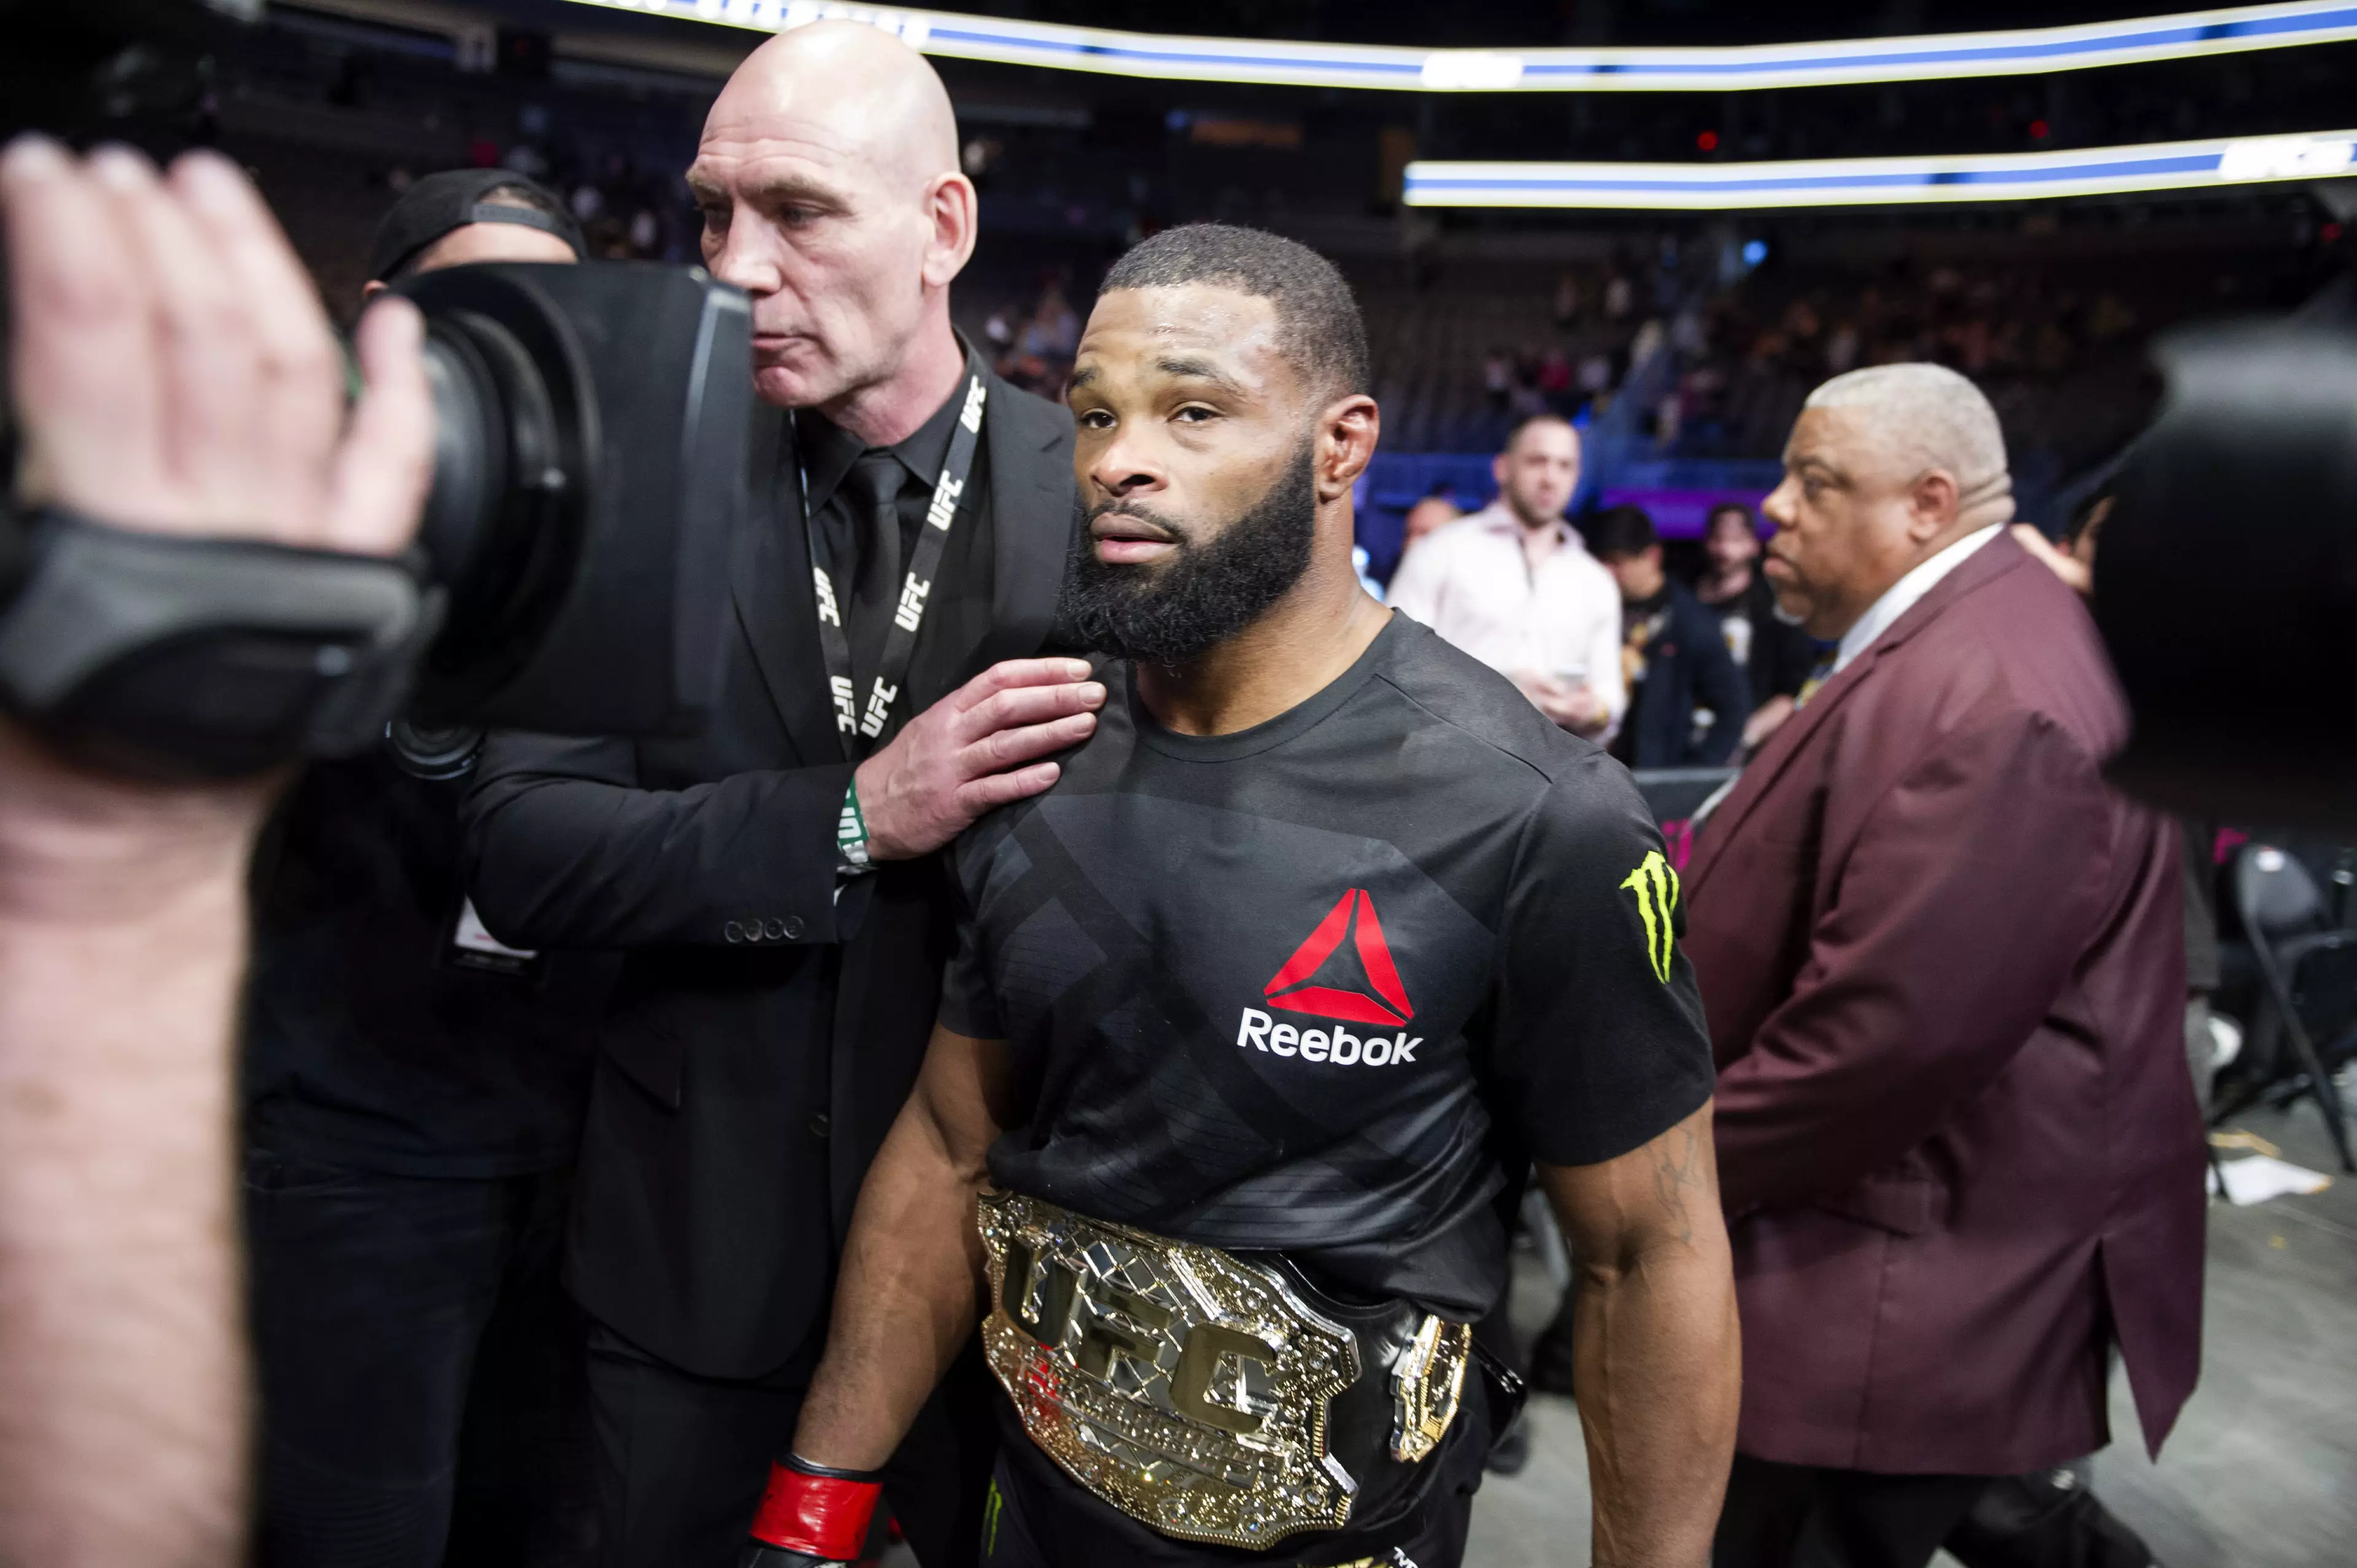 Tyron Woodley was the UFC Welterweight Champion for nearly three years